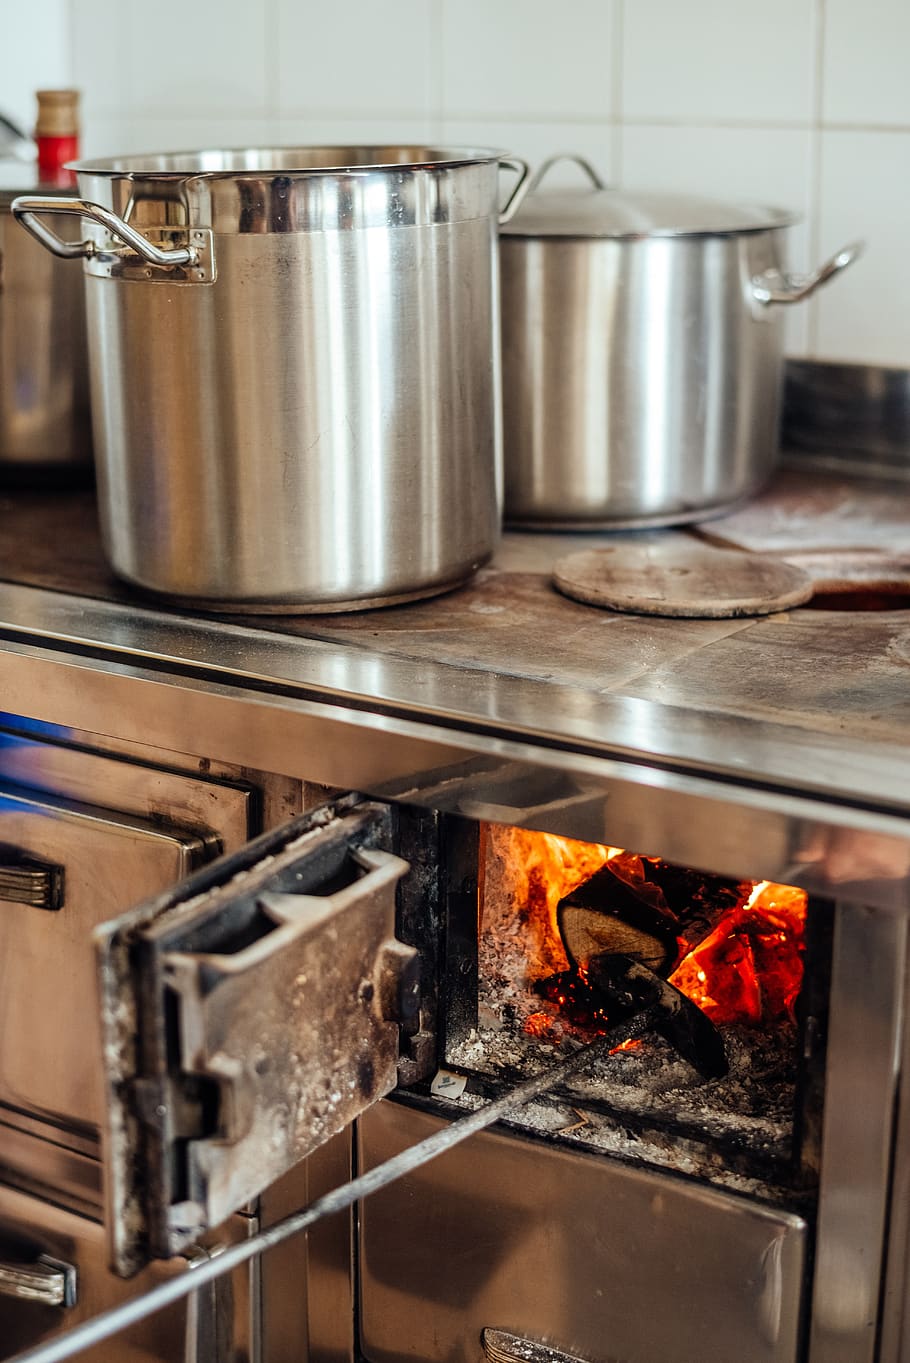 wood fire, cook, pot, stove, old, oven, wood burning stove, fireplace, appliance, heat - temperature